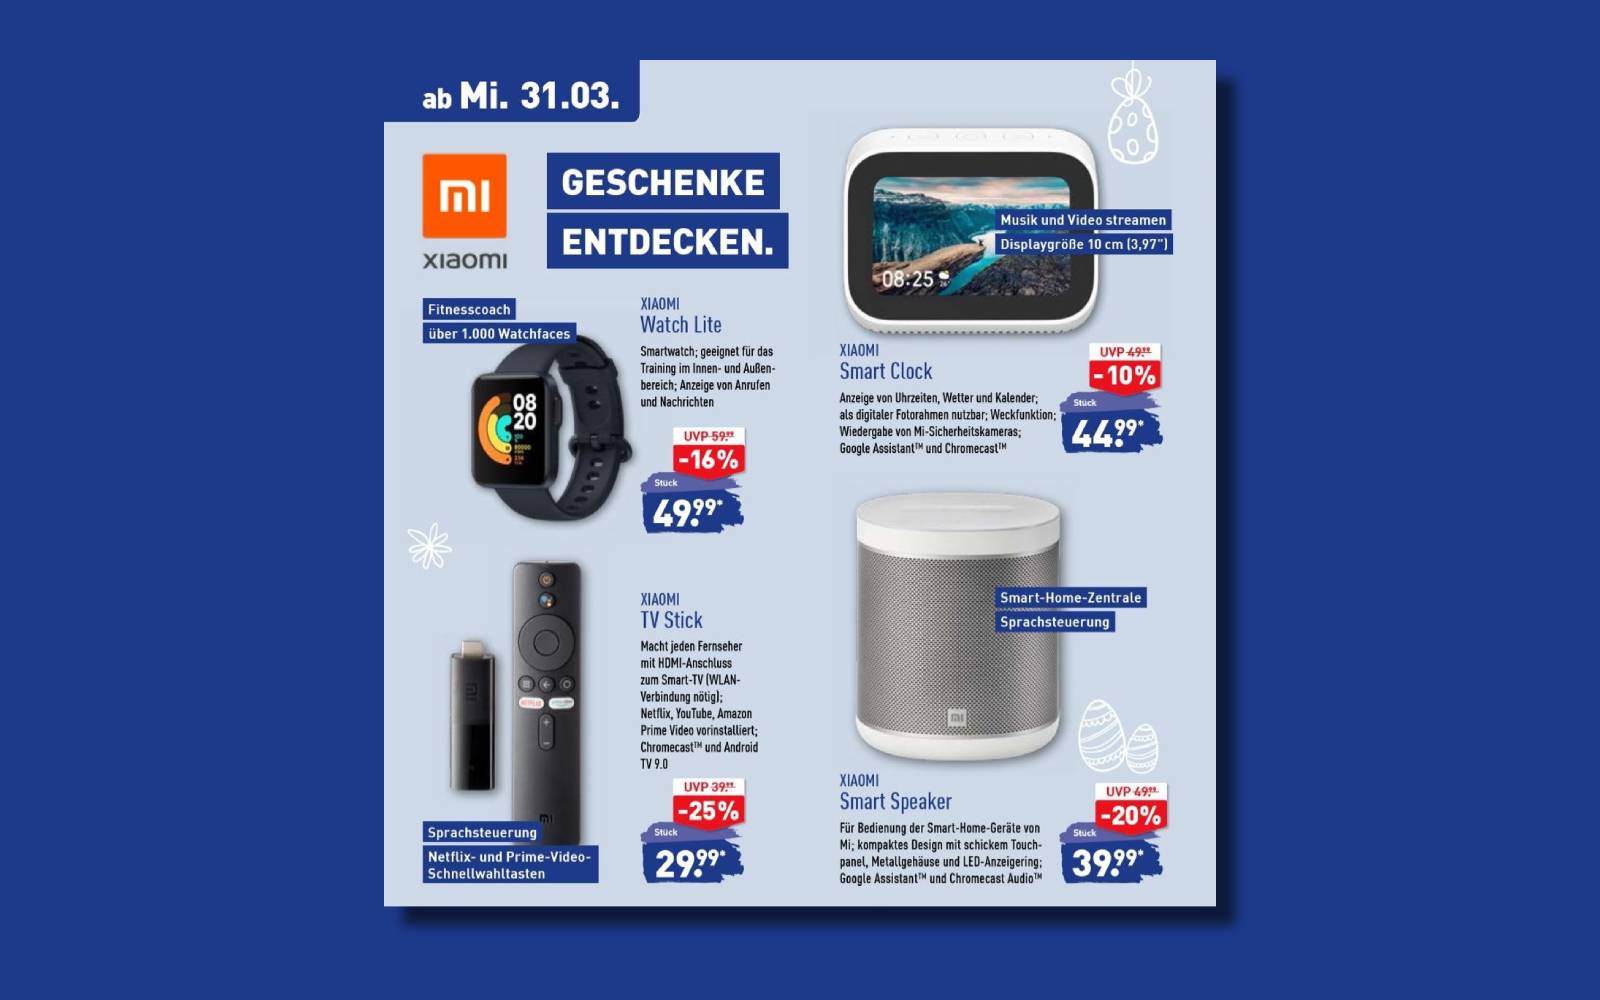 How good are Xiaomi's Aldi deals really?